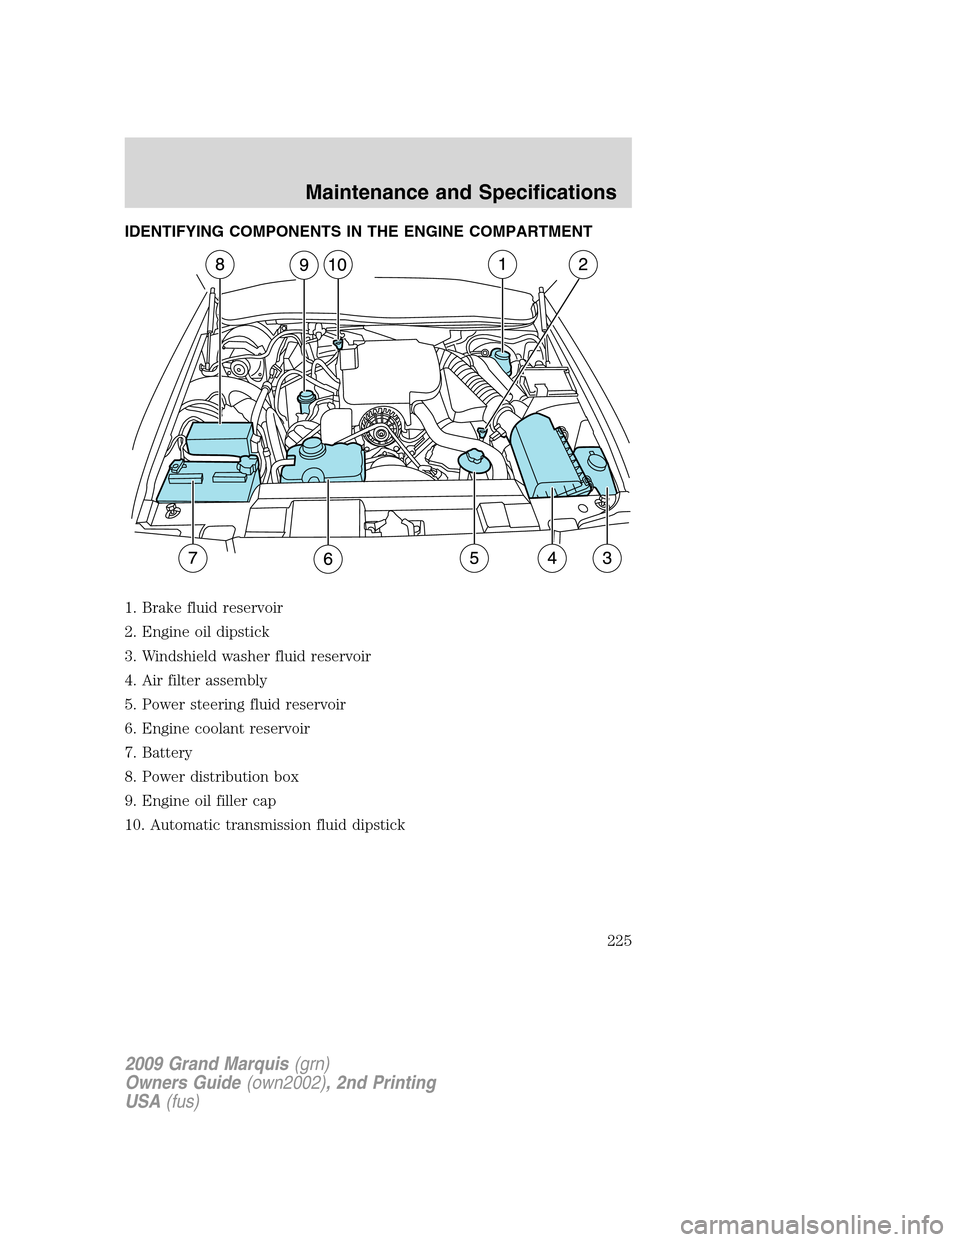 Mercury Grand Marquis 2009  Owners Manuals IDENTIFYING COMPONENTS IN THE ENGINE COMPARTMENT
1. Brake fluid reservoir
2. Engine oil dipstick
3. Windshield washer fluid reservoir
4. Air filter assembly
5. Power steering fluid reservoir
6. Engine